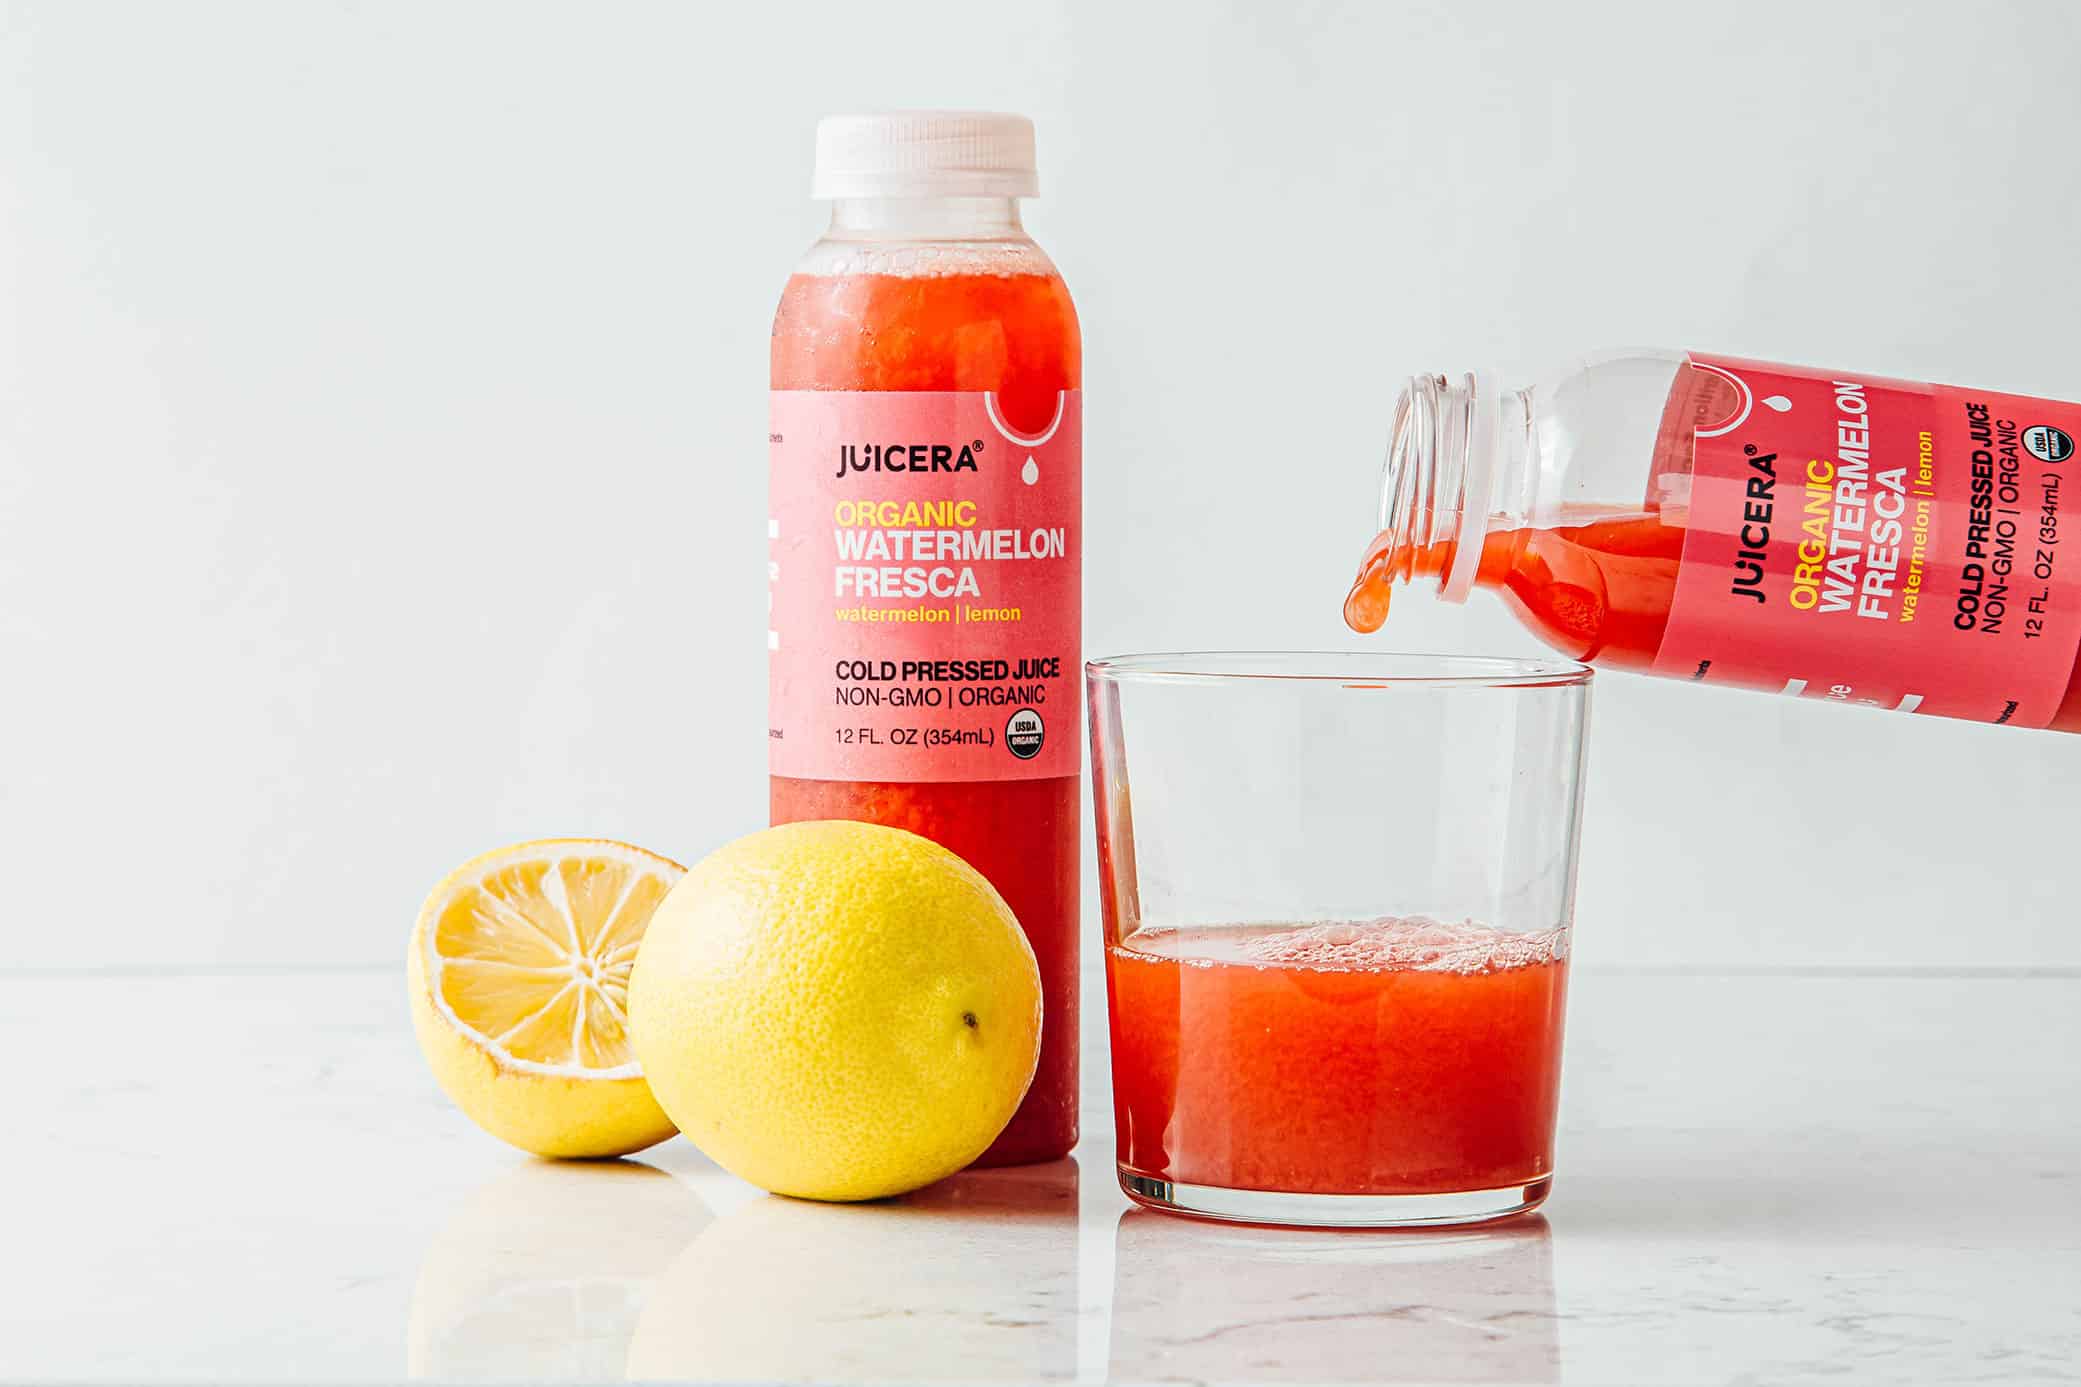 Juicera packaging design showcasing Watermelon Fresca flavor being poured into a glass with cut lemon near.